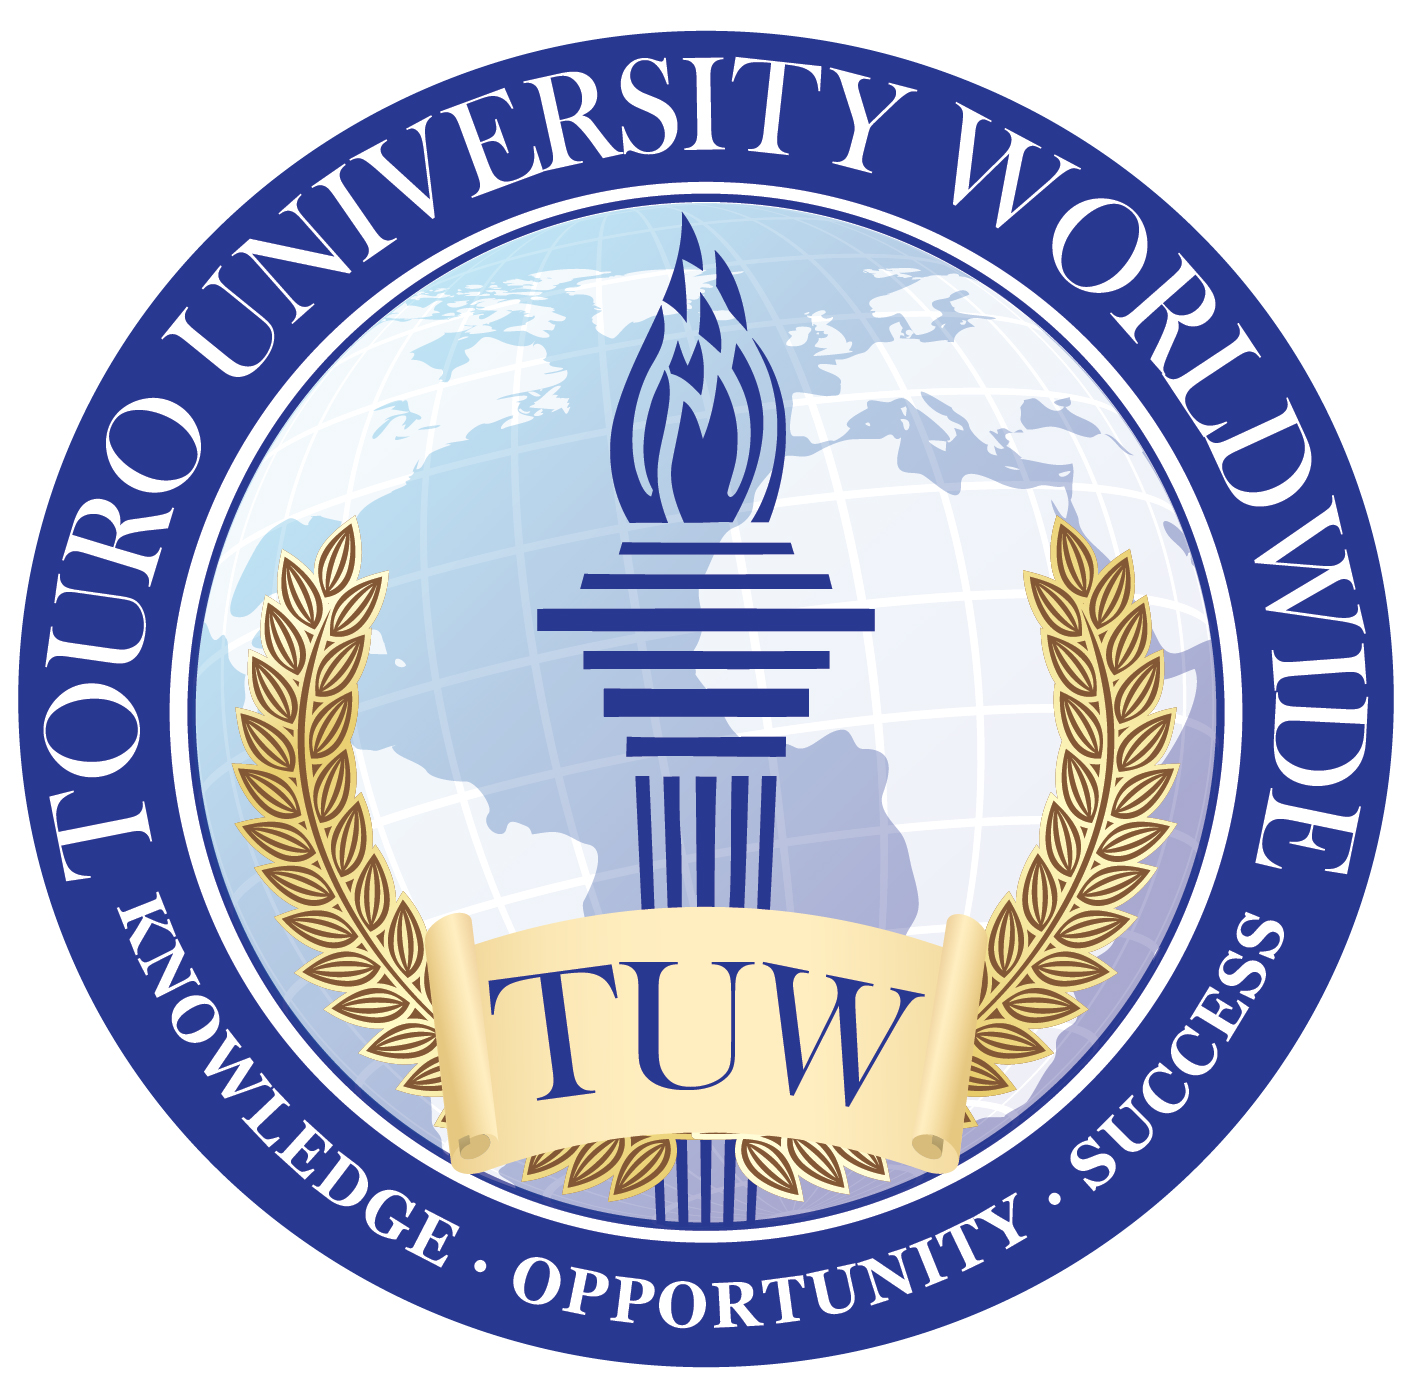 Master of Arts in Marriage and Family Therapy Program at Touro University Worldwide